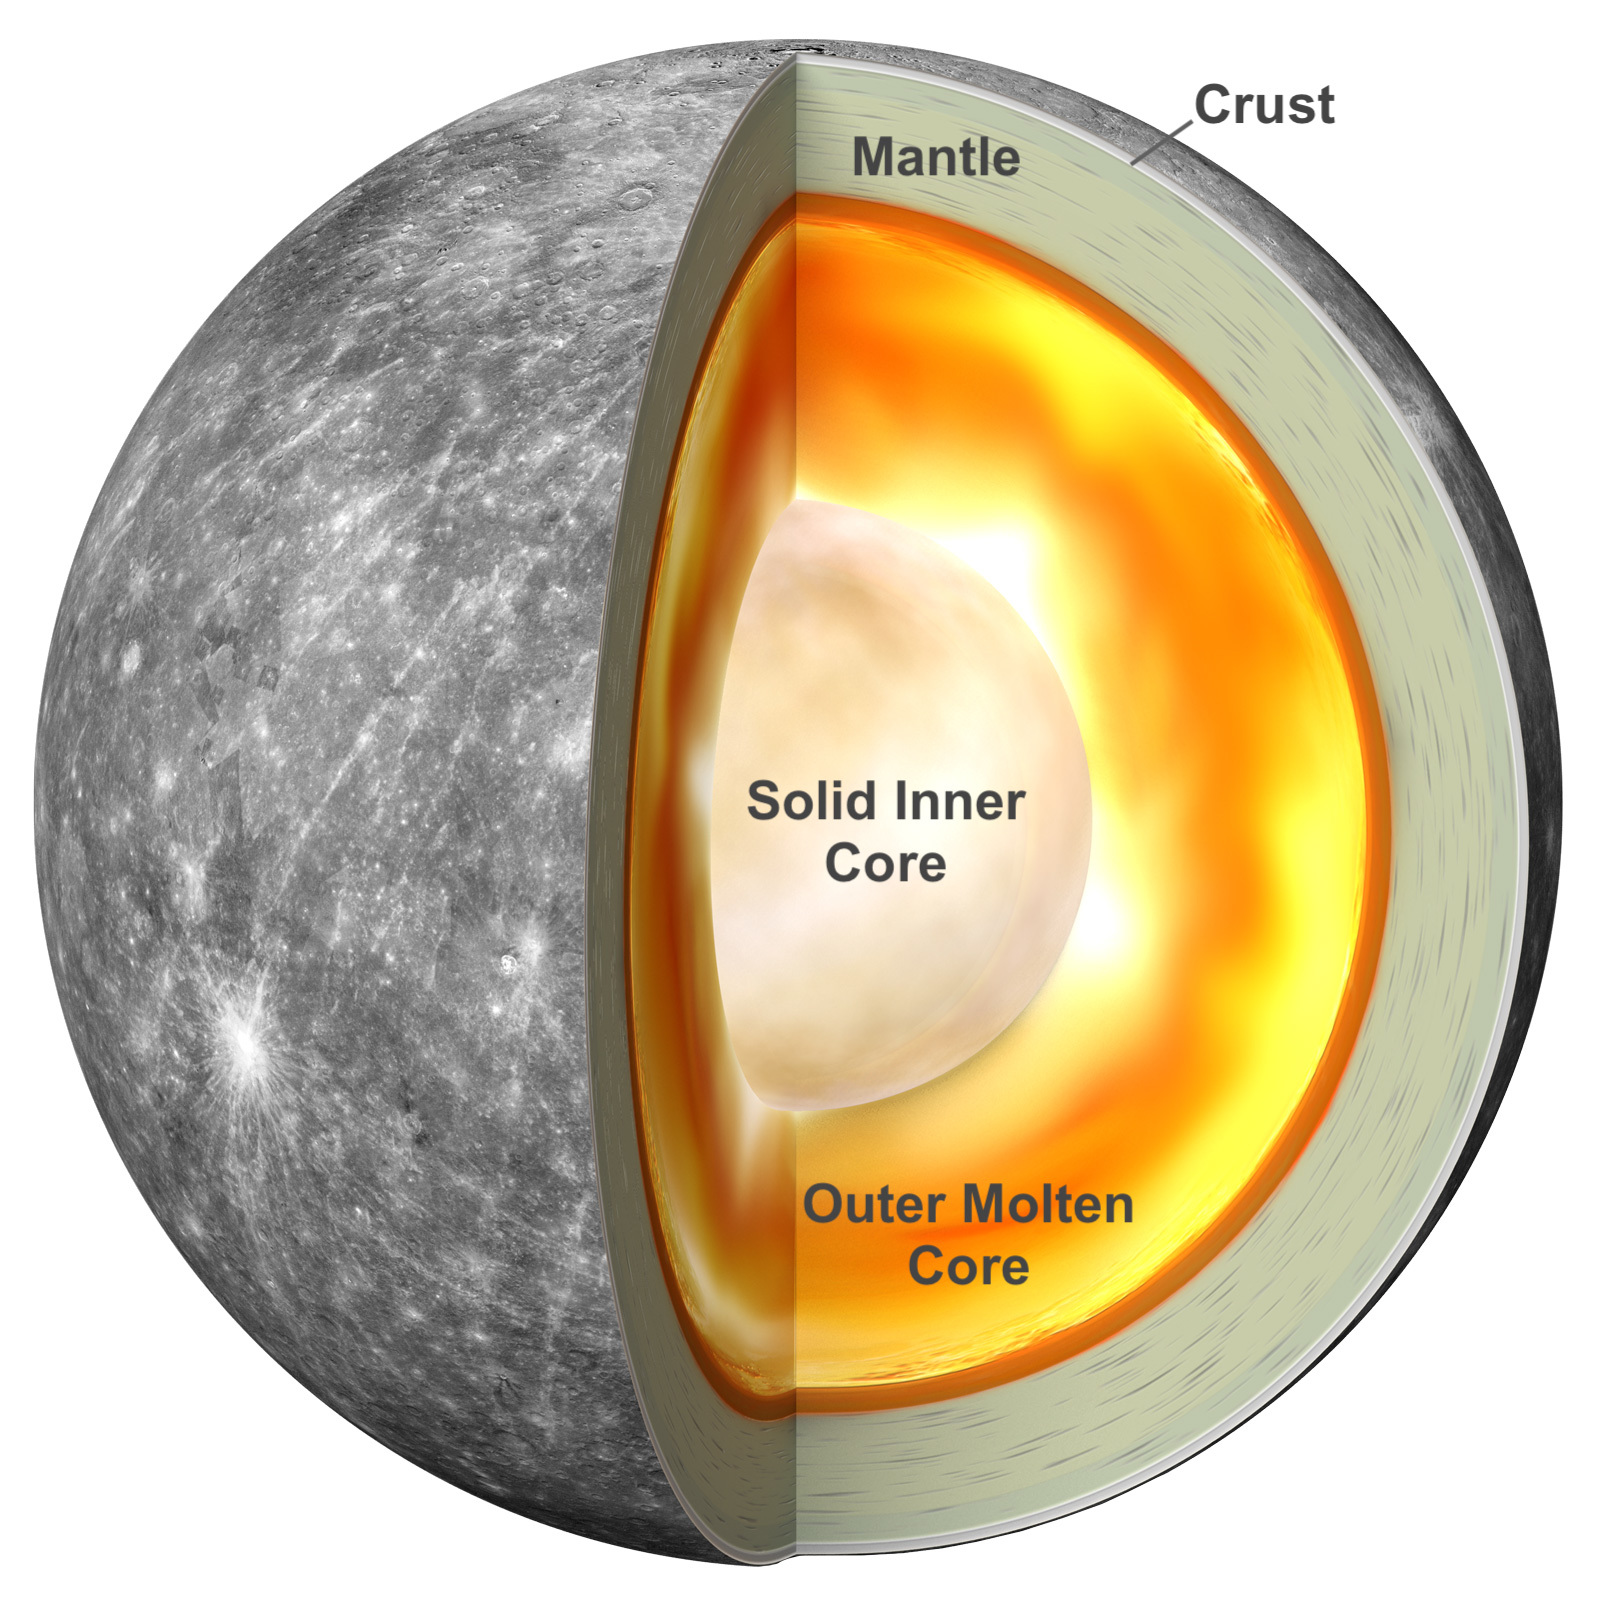 Diagram showing a solid core surrounded by a molten core inside Mercury.